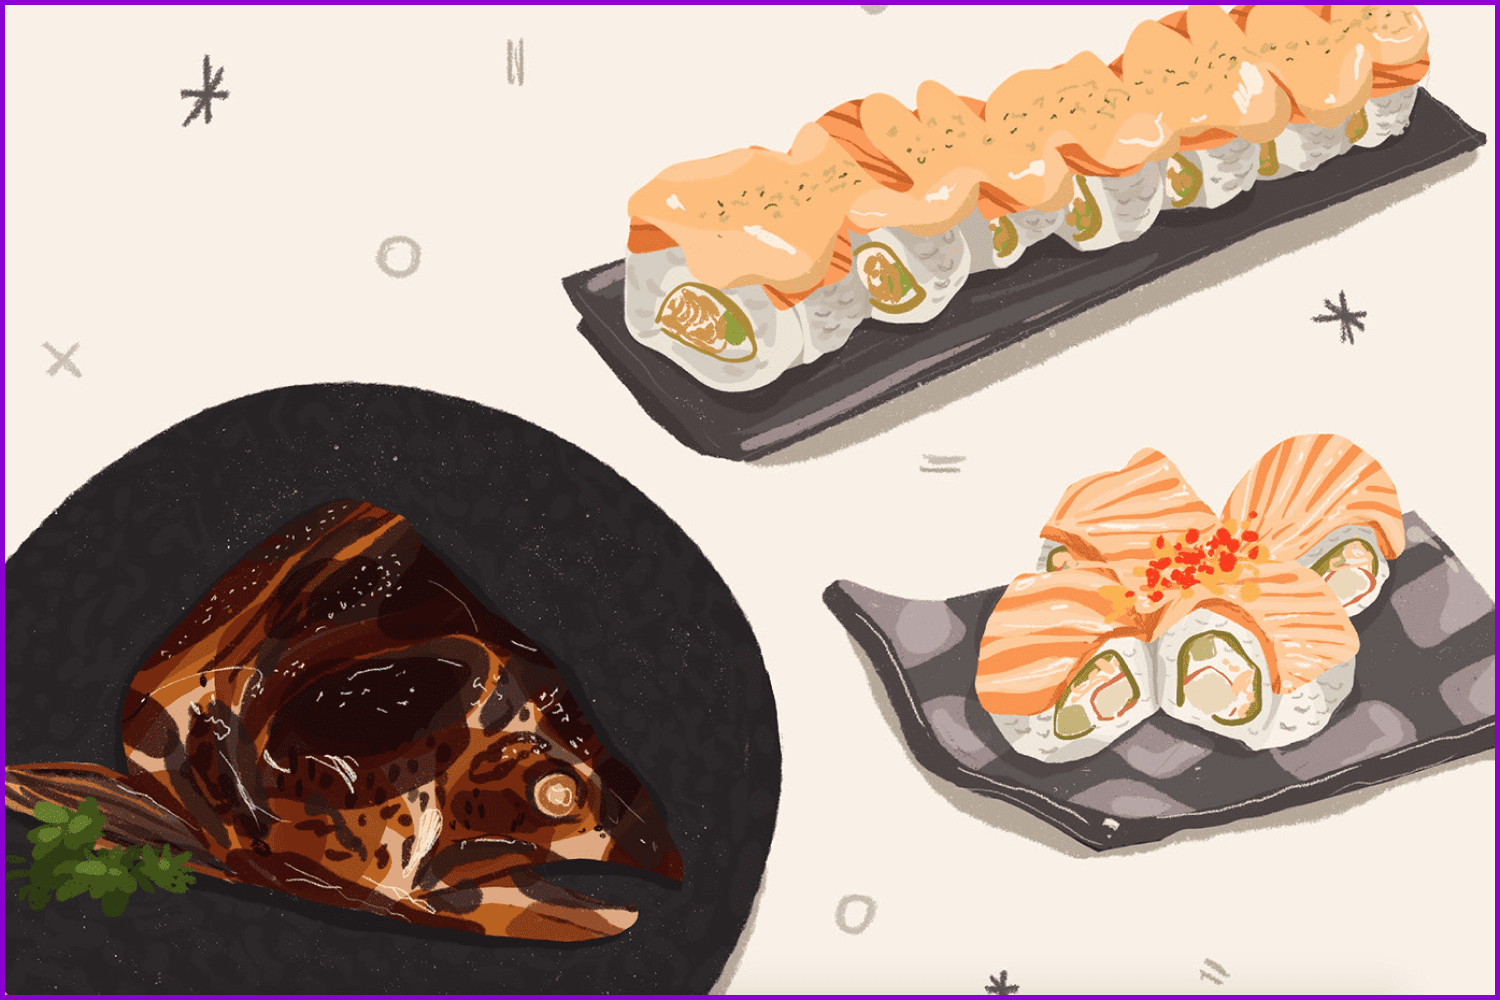 Drawn sushi and fish head on plates.